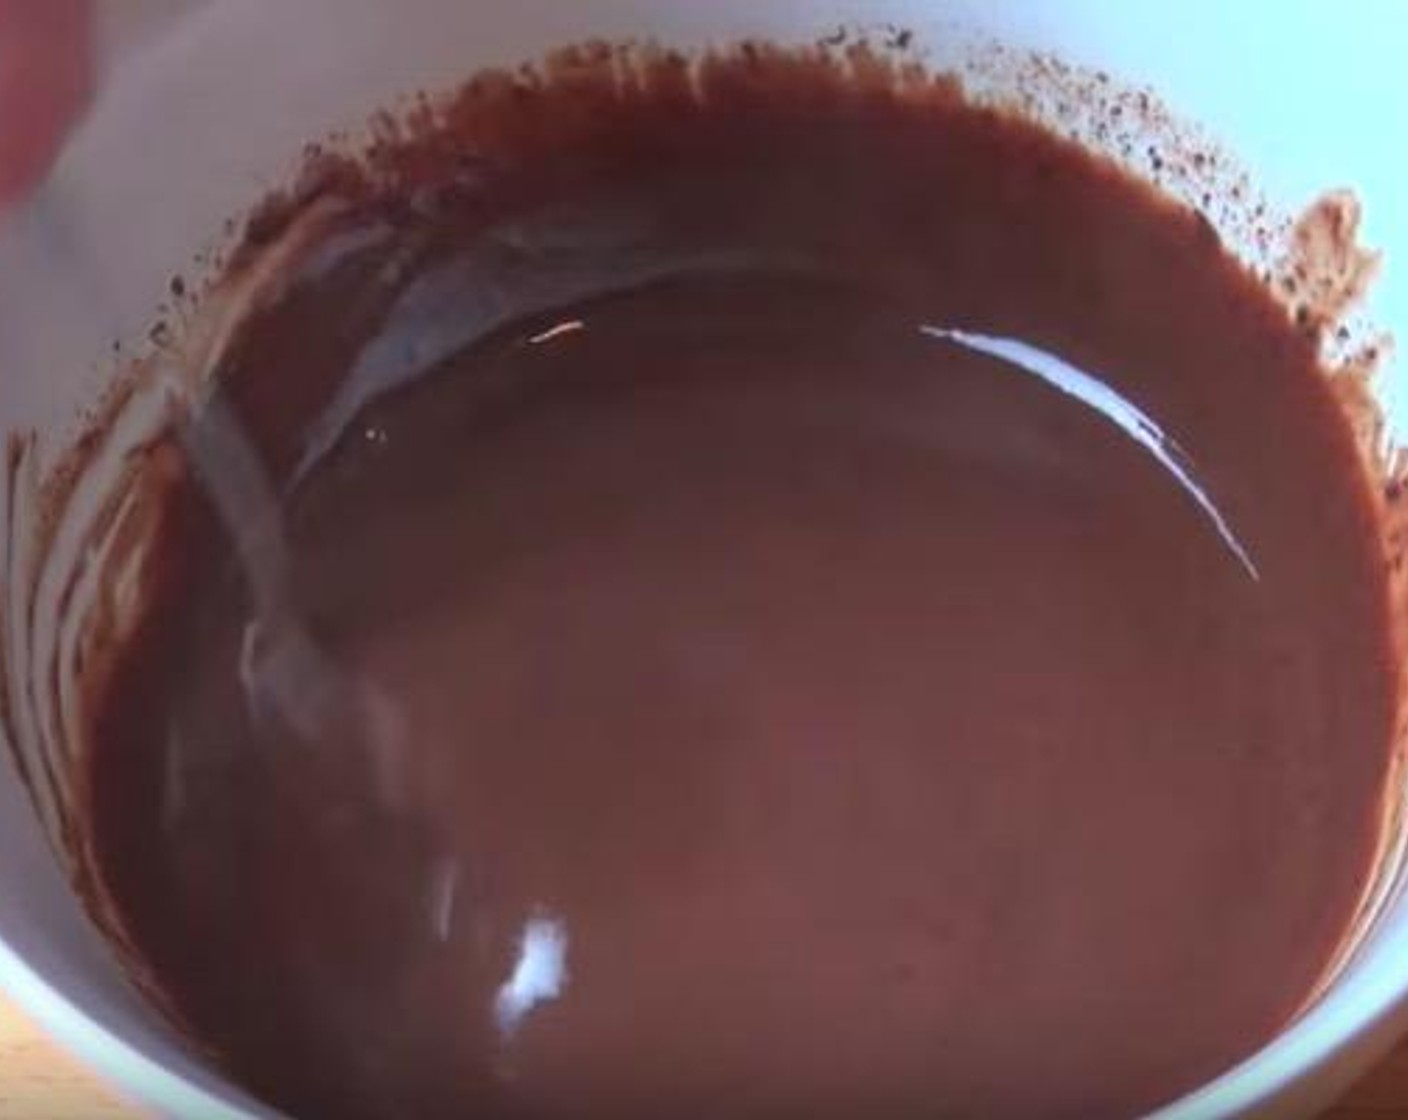 step 3 Put Chocolate (1/2 cup), Whipping Cream (1/2 cup) in a bowl and put it into the microwave oven for 30 seconds, then give it a stir and give it another 30 seconds, repeat until it's melted. Set it aside for 30 minutes to cool off.